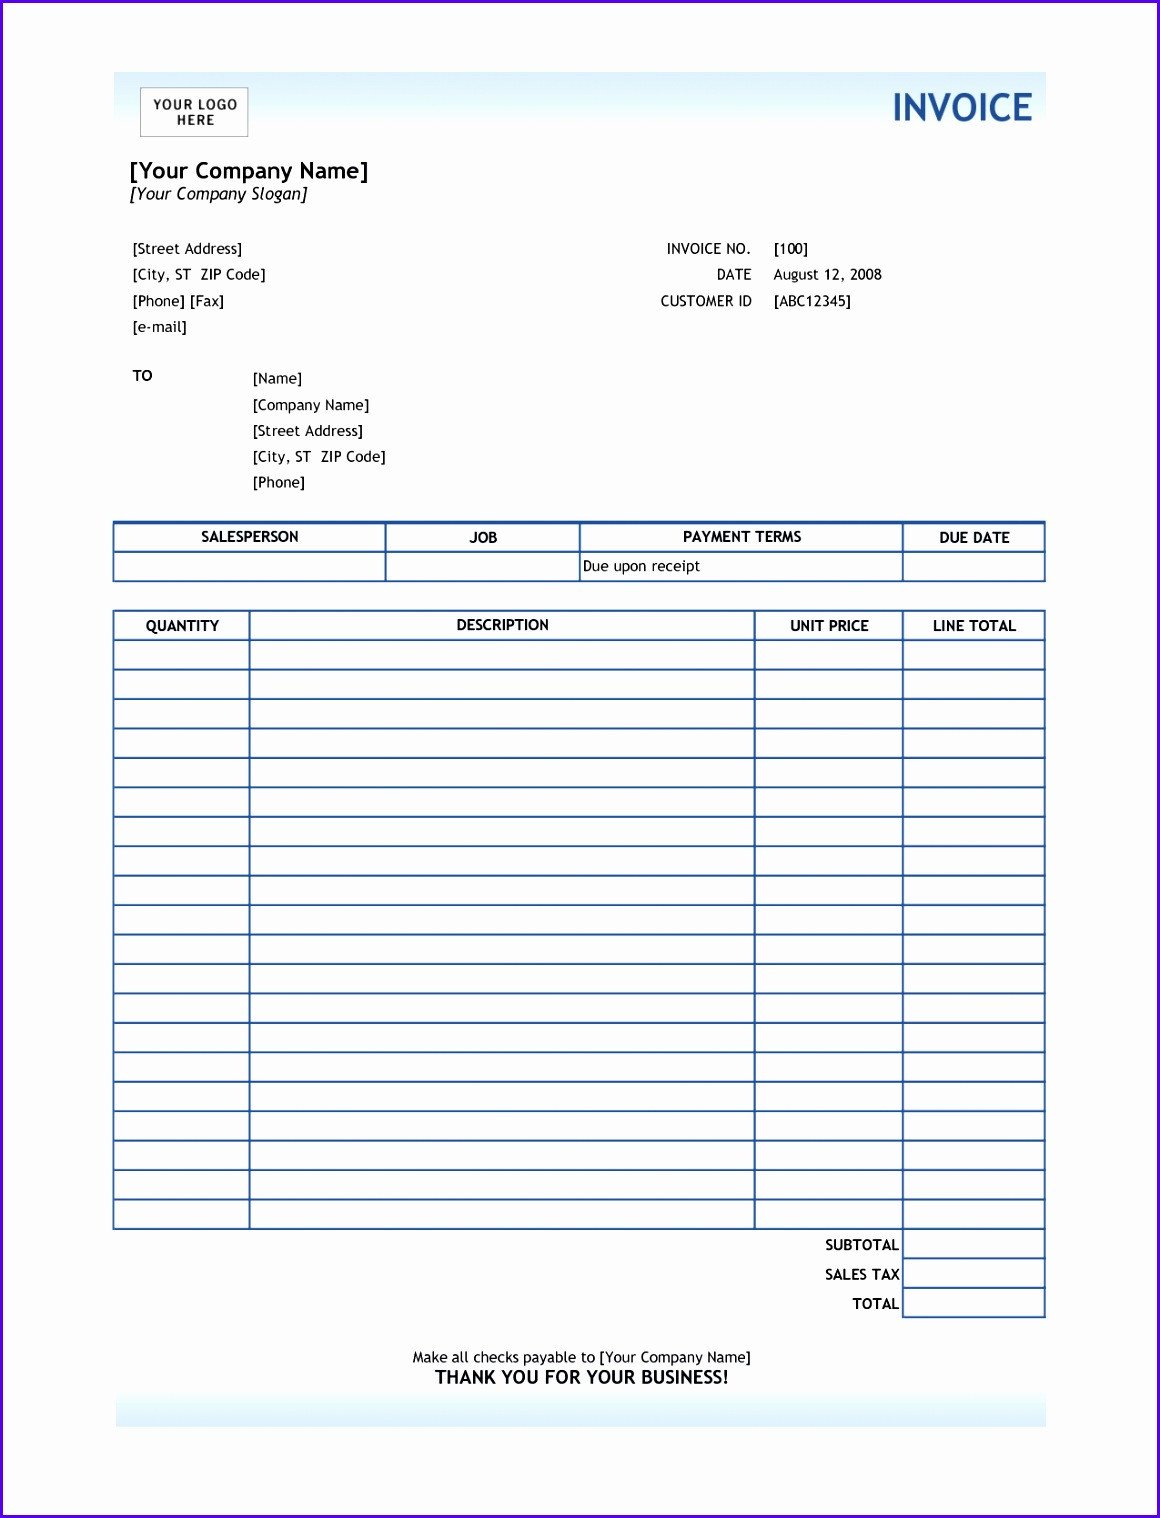 Ms Excel Invoice Template 10 Microsoft Excel Invoice Template Free Download